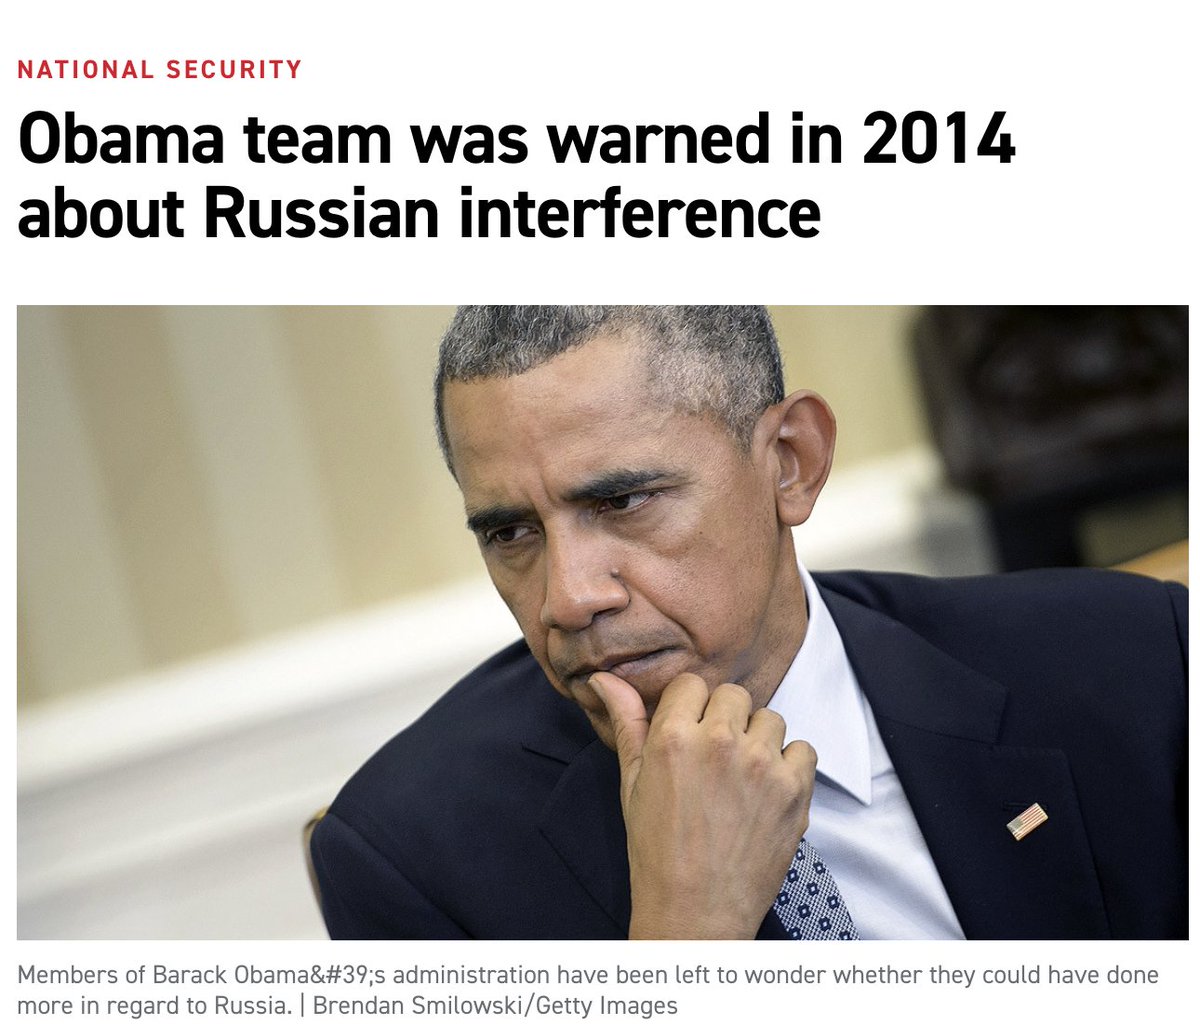 According to this Washington Post article, Russia’s 'efforts to interfere in the U.S. political system first became evident in the run-up to the 2016 presidential elections.' That's just...embarrassingly untrue. These people really want us to believe that history began in 2016.